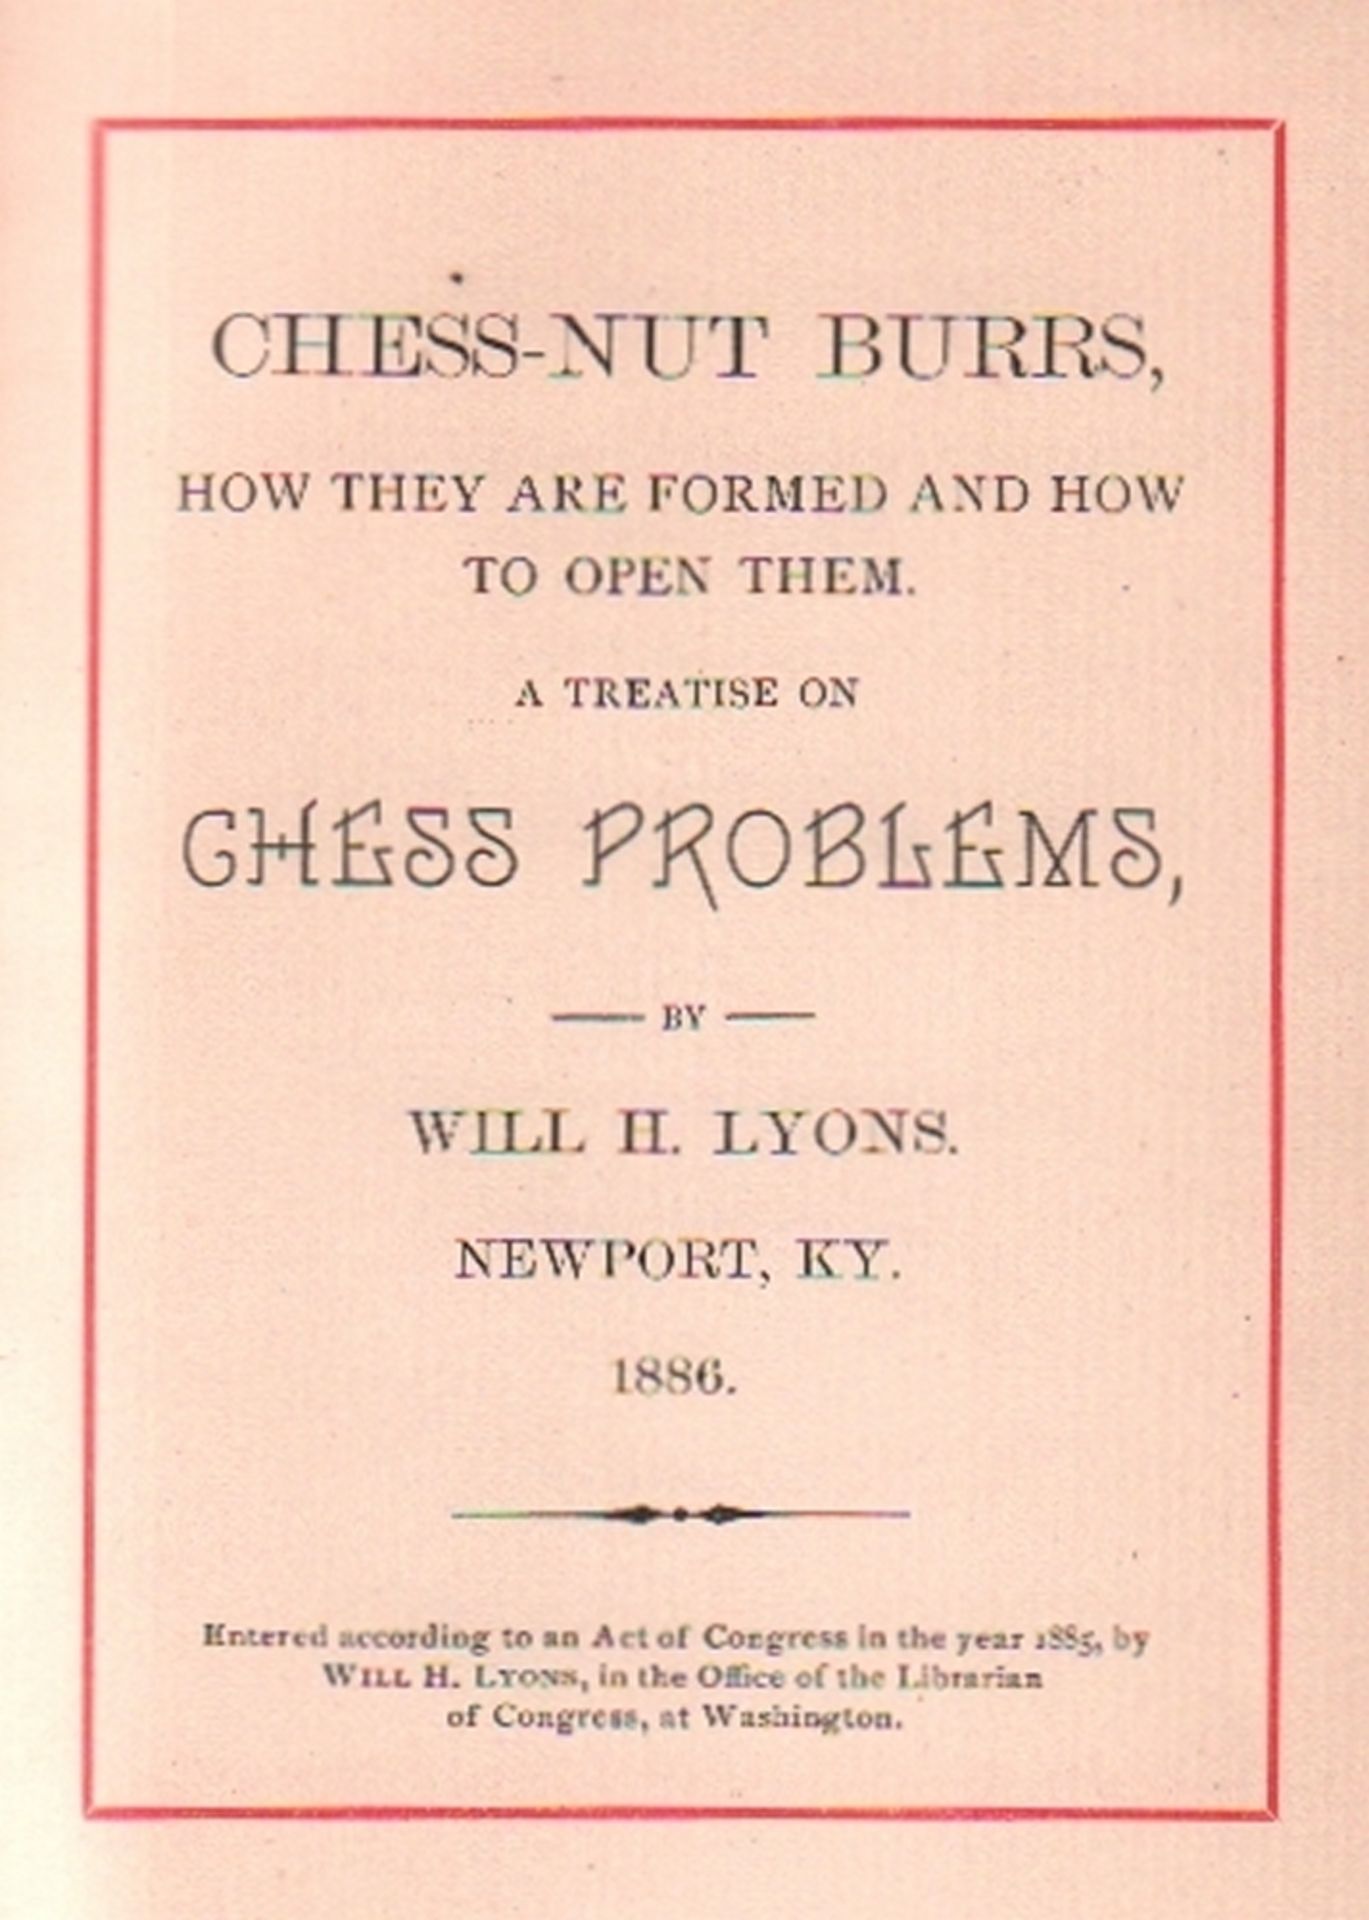 Lyons, William H(enry). (Hrsg.) Chess - nut burrs, how they are formed and how to open them. A